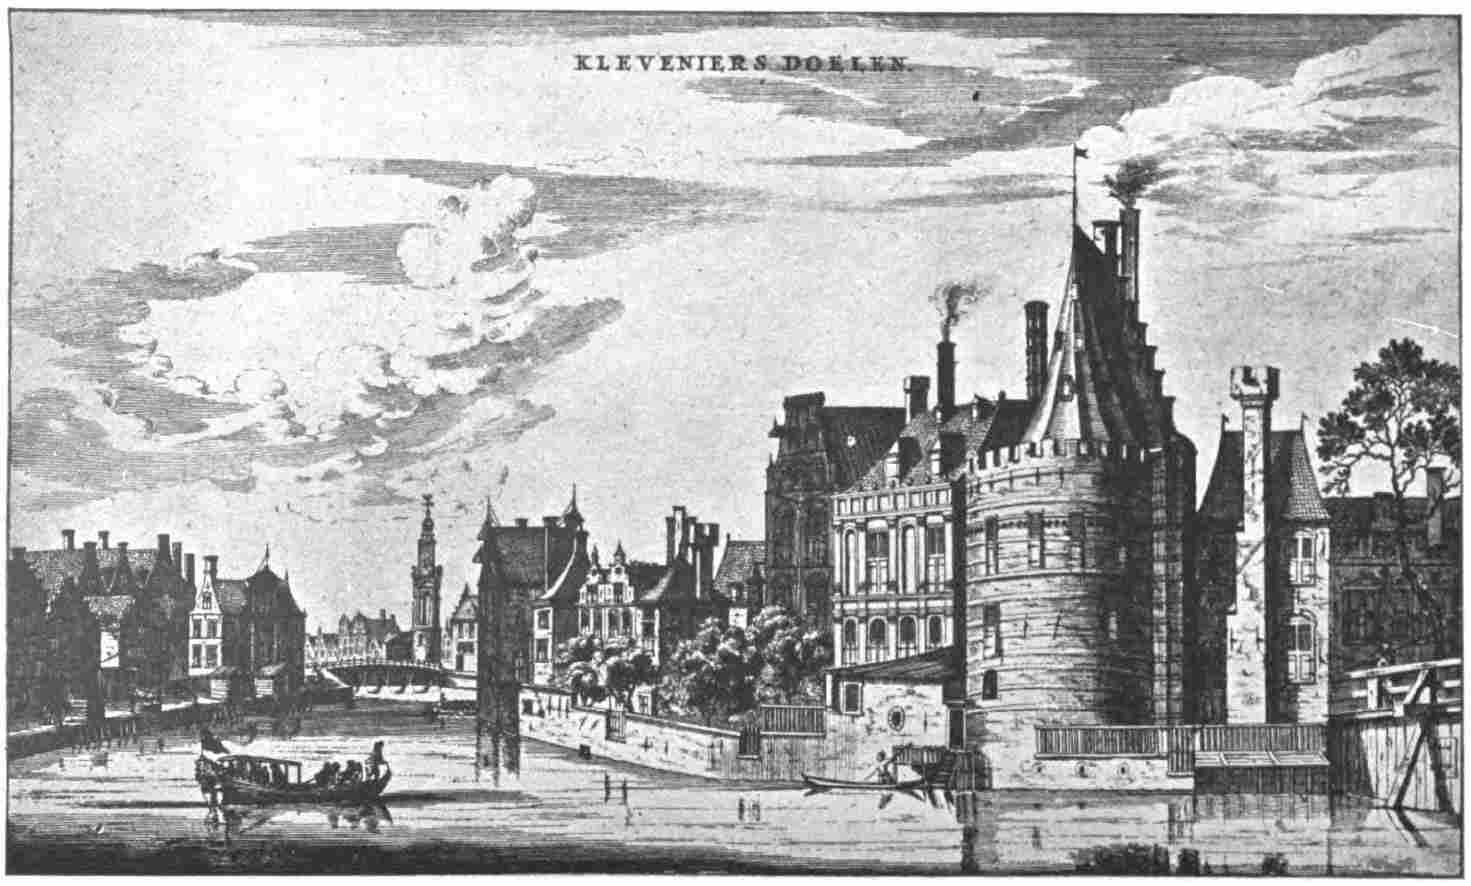 Plate 20. The Tower “Swyght-Utrecht” and the Backs of the Houses of the “Doelenstraat” in Amsterdam.